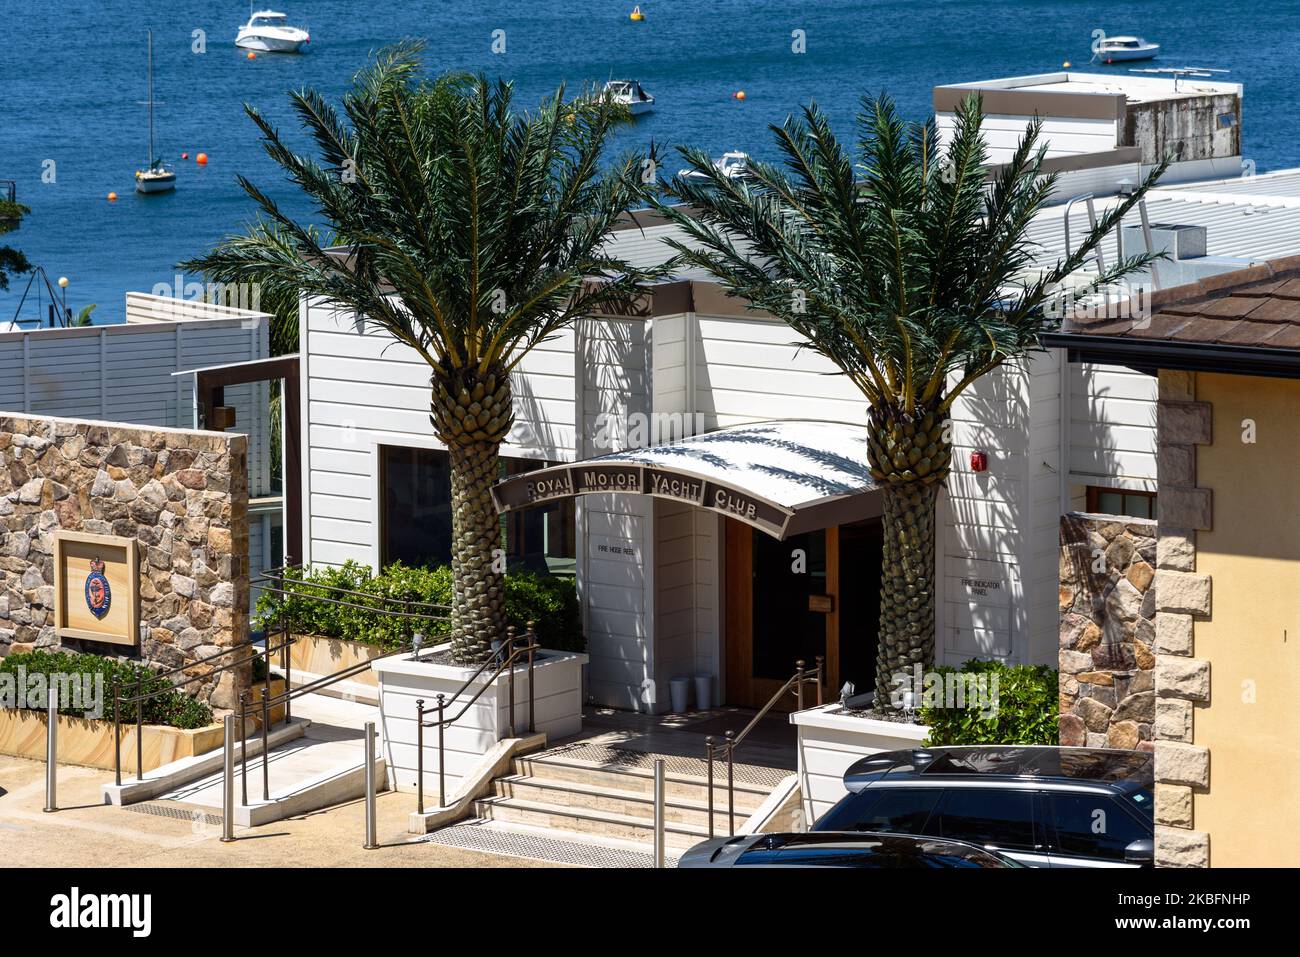 The Royal Motor Yacht Club building in Point Piper, Sydney, Australia Stock Photo